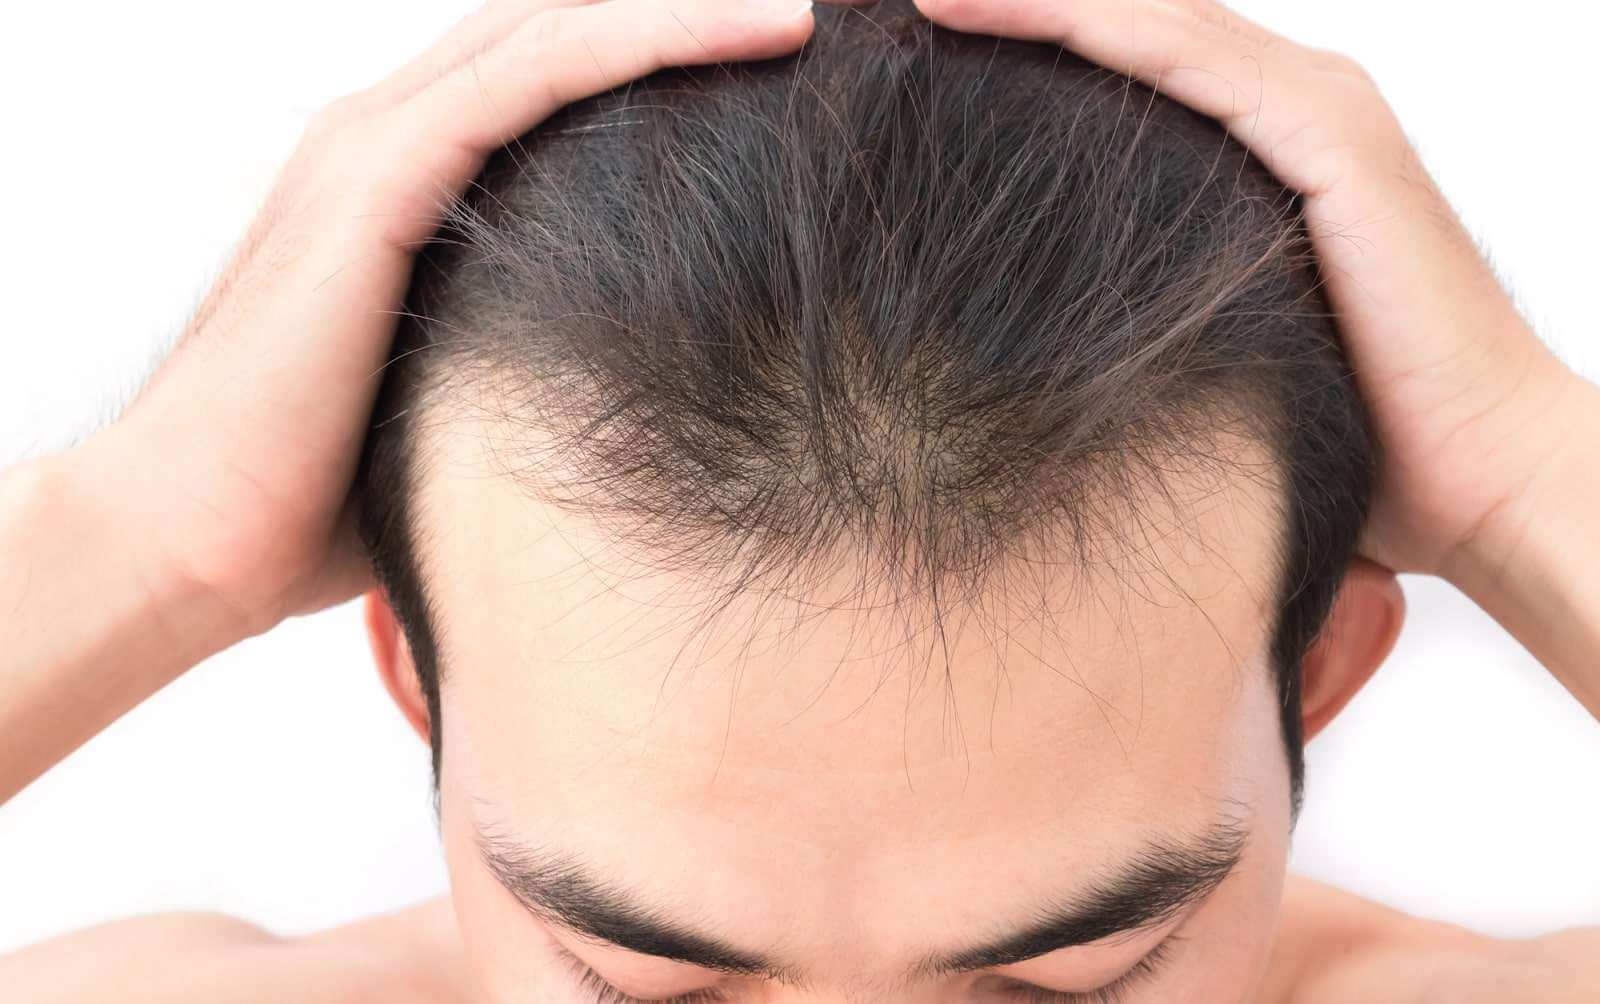 Why Is My Hair So Thin? Possible Reasons For Male Hair Loss